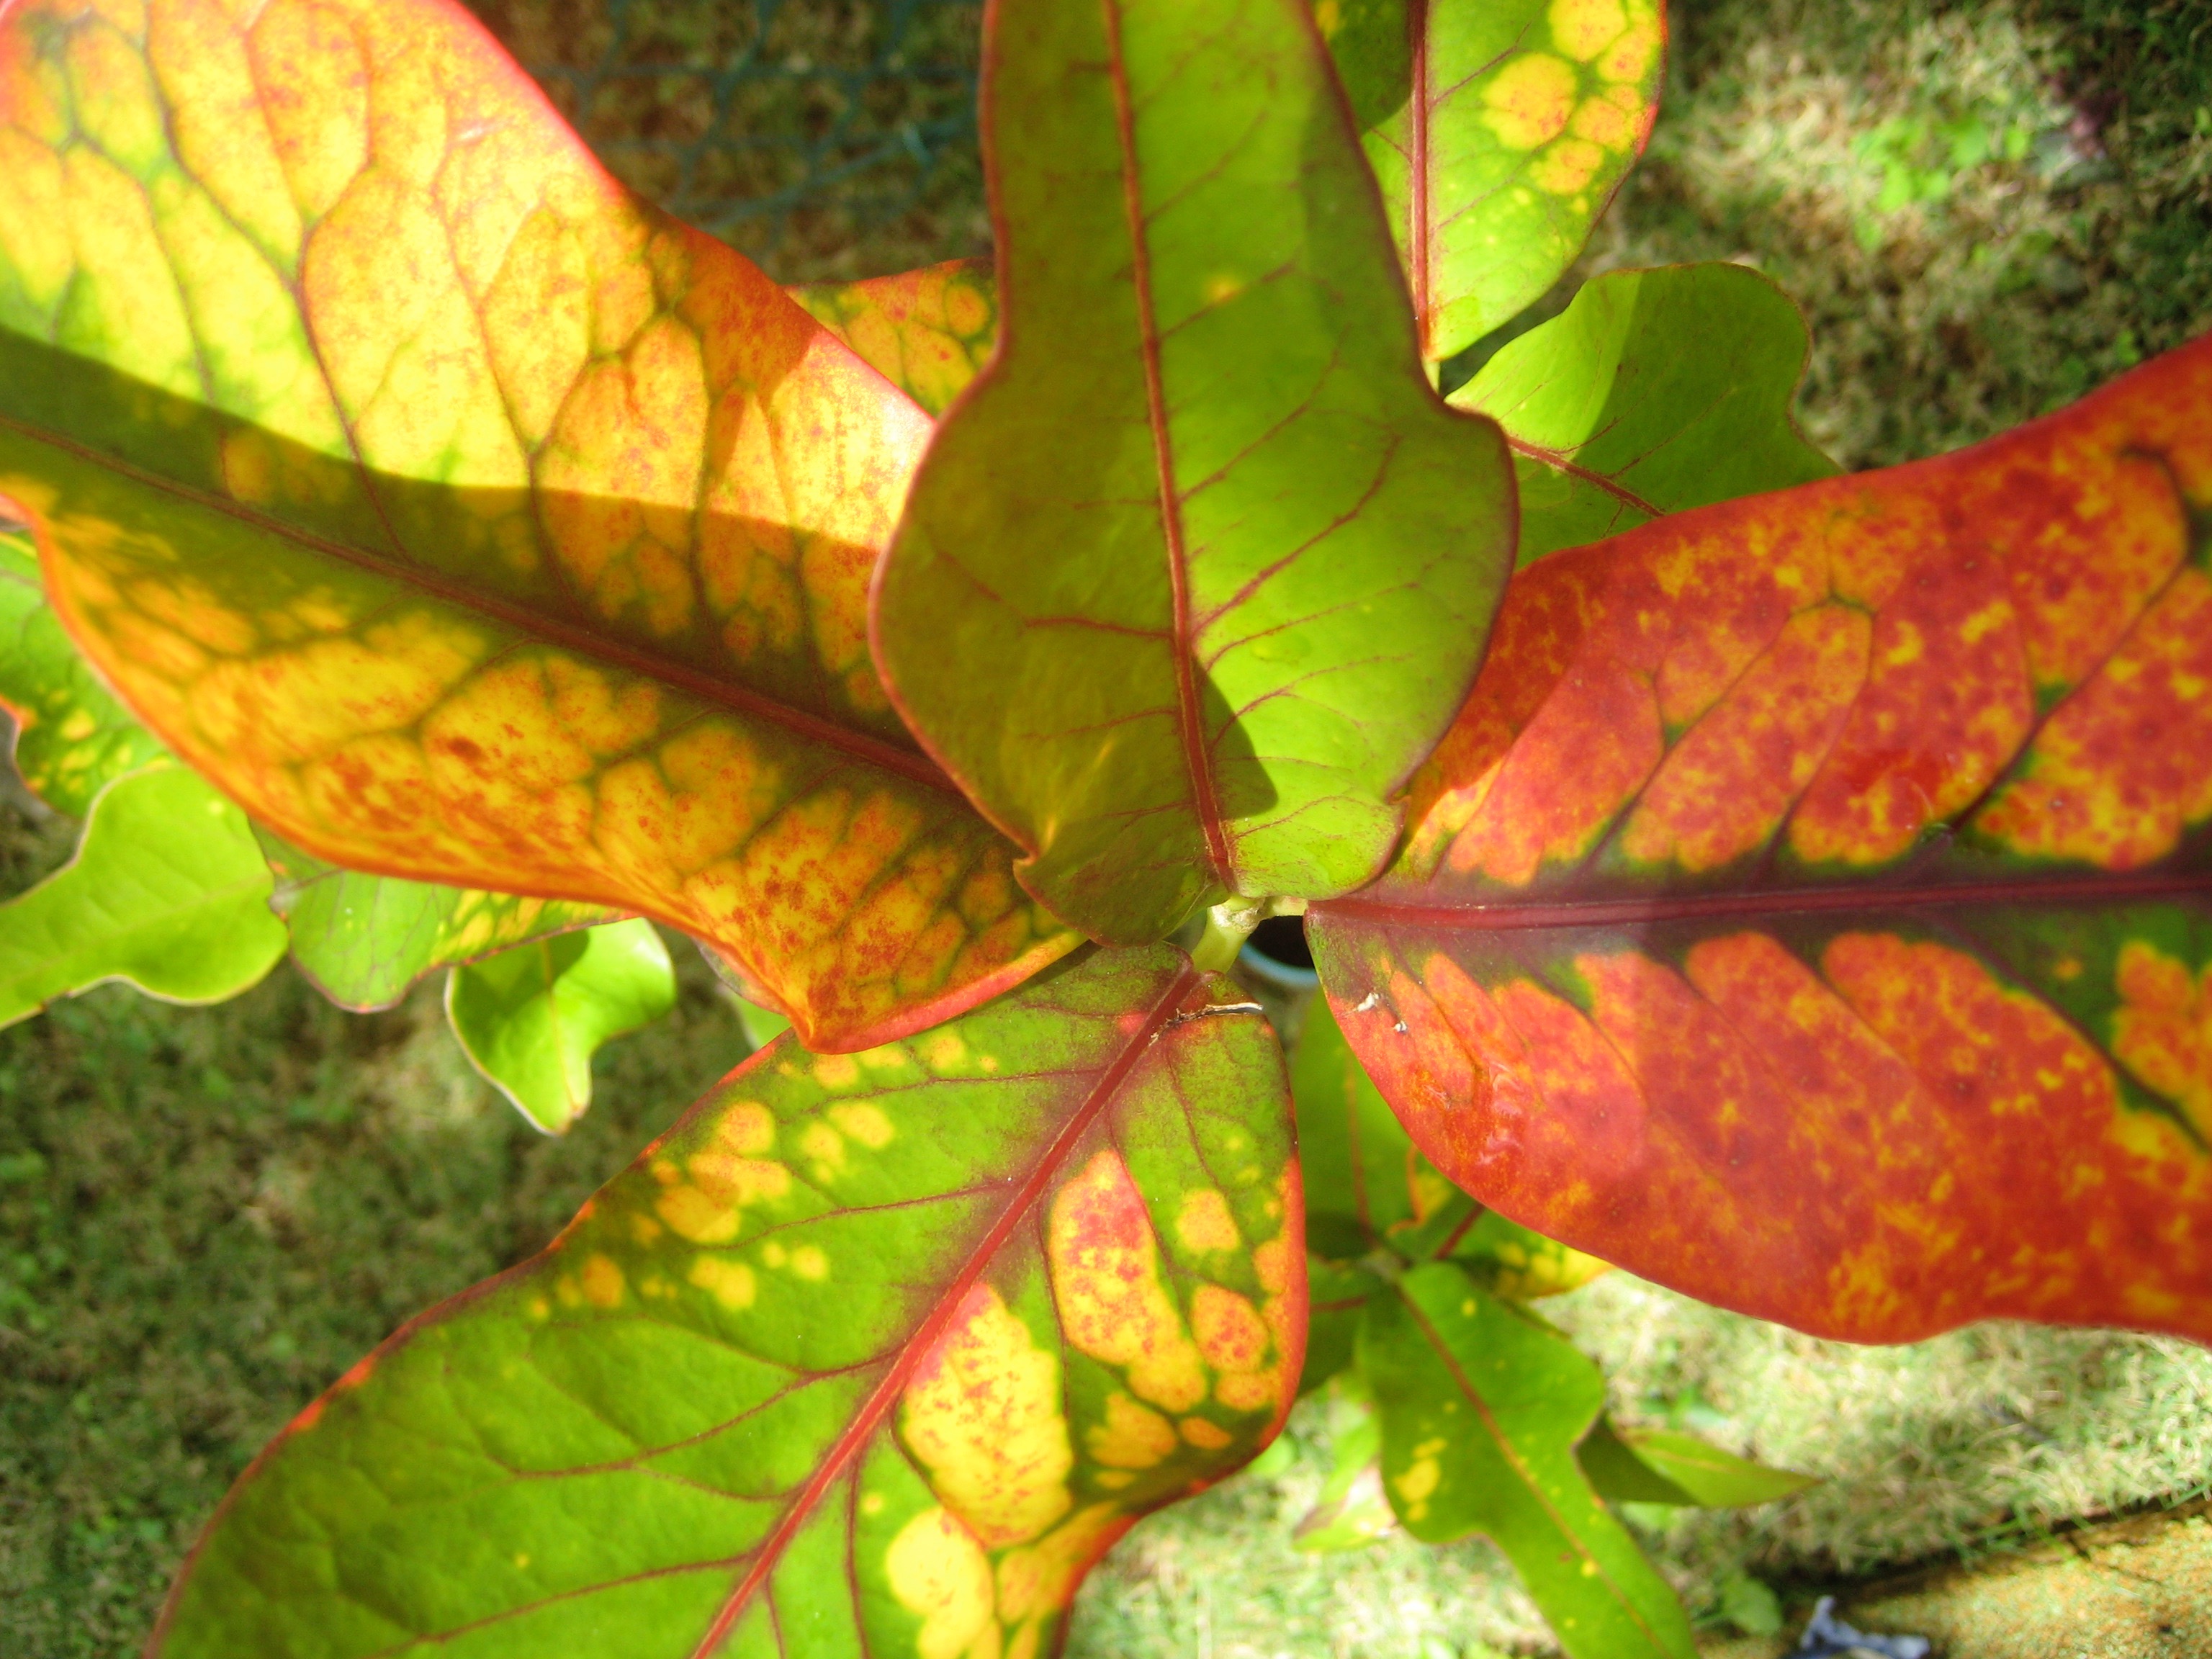 Closeup of green, yellow and red leaves of a plant.